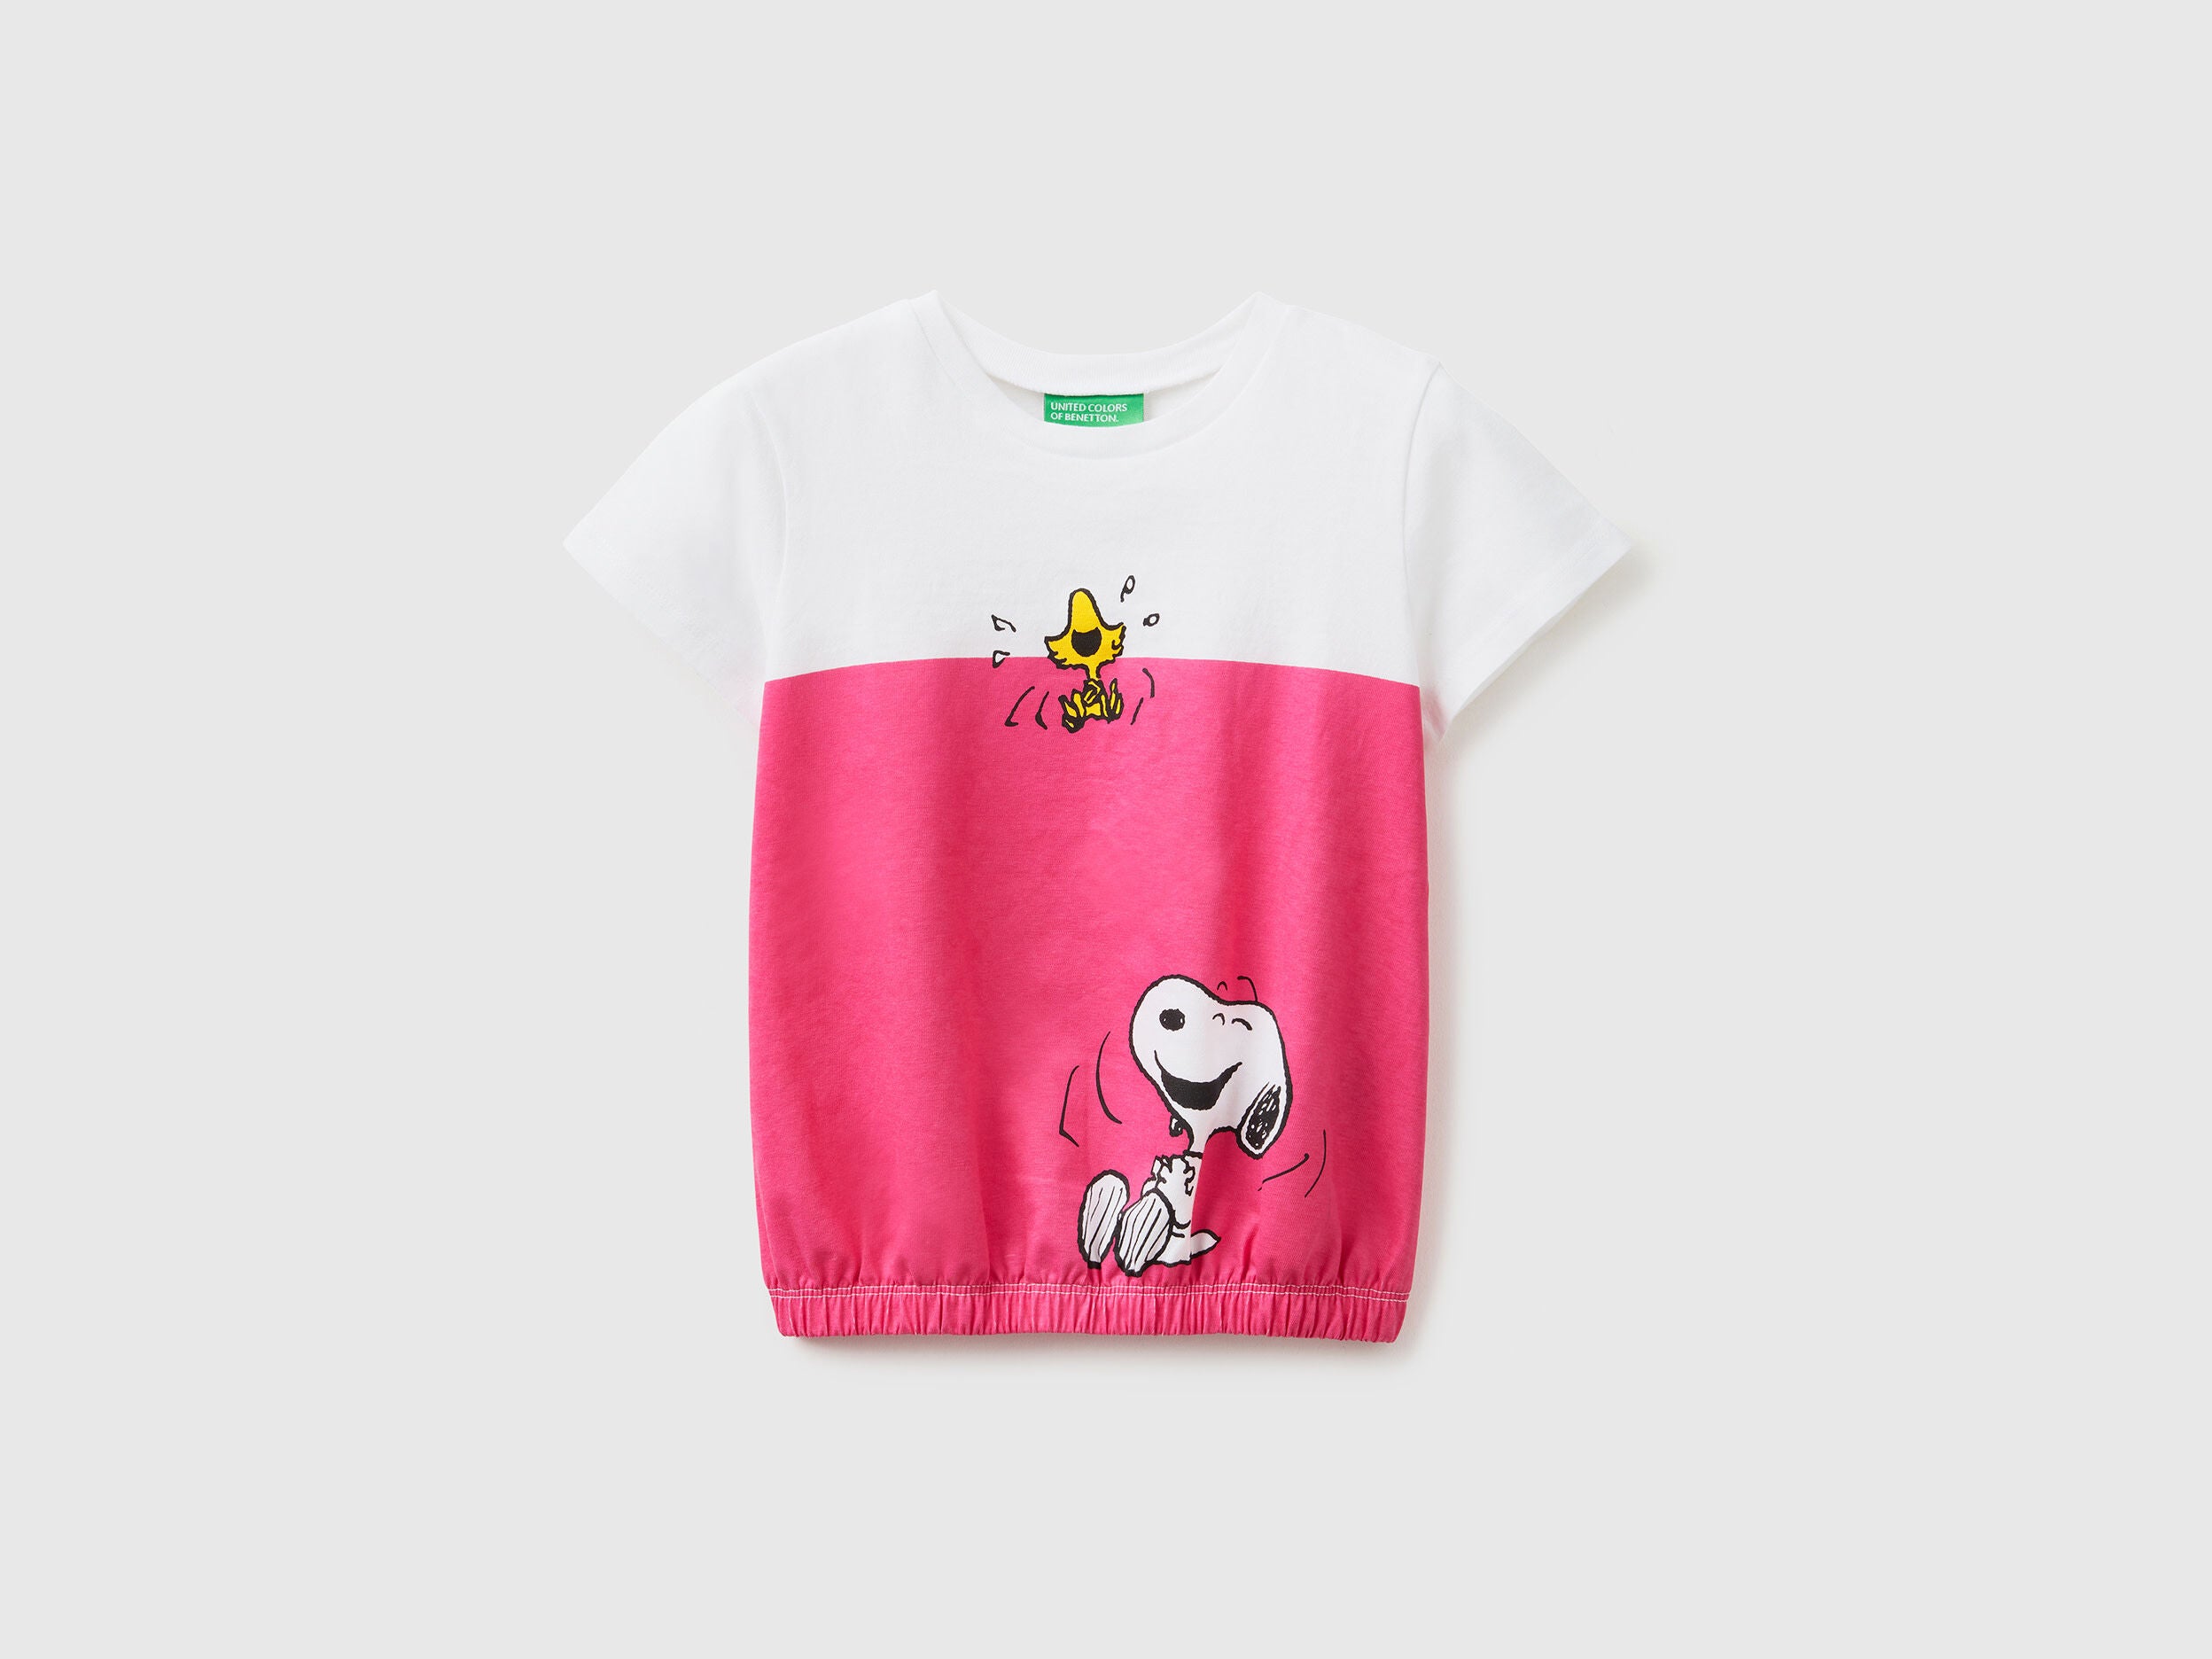 Peanuts T-Shirt With Elastic At The Bottom